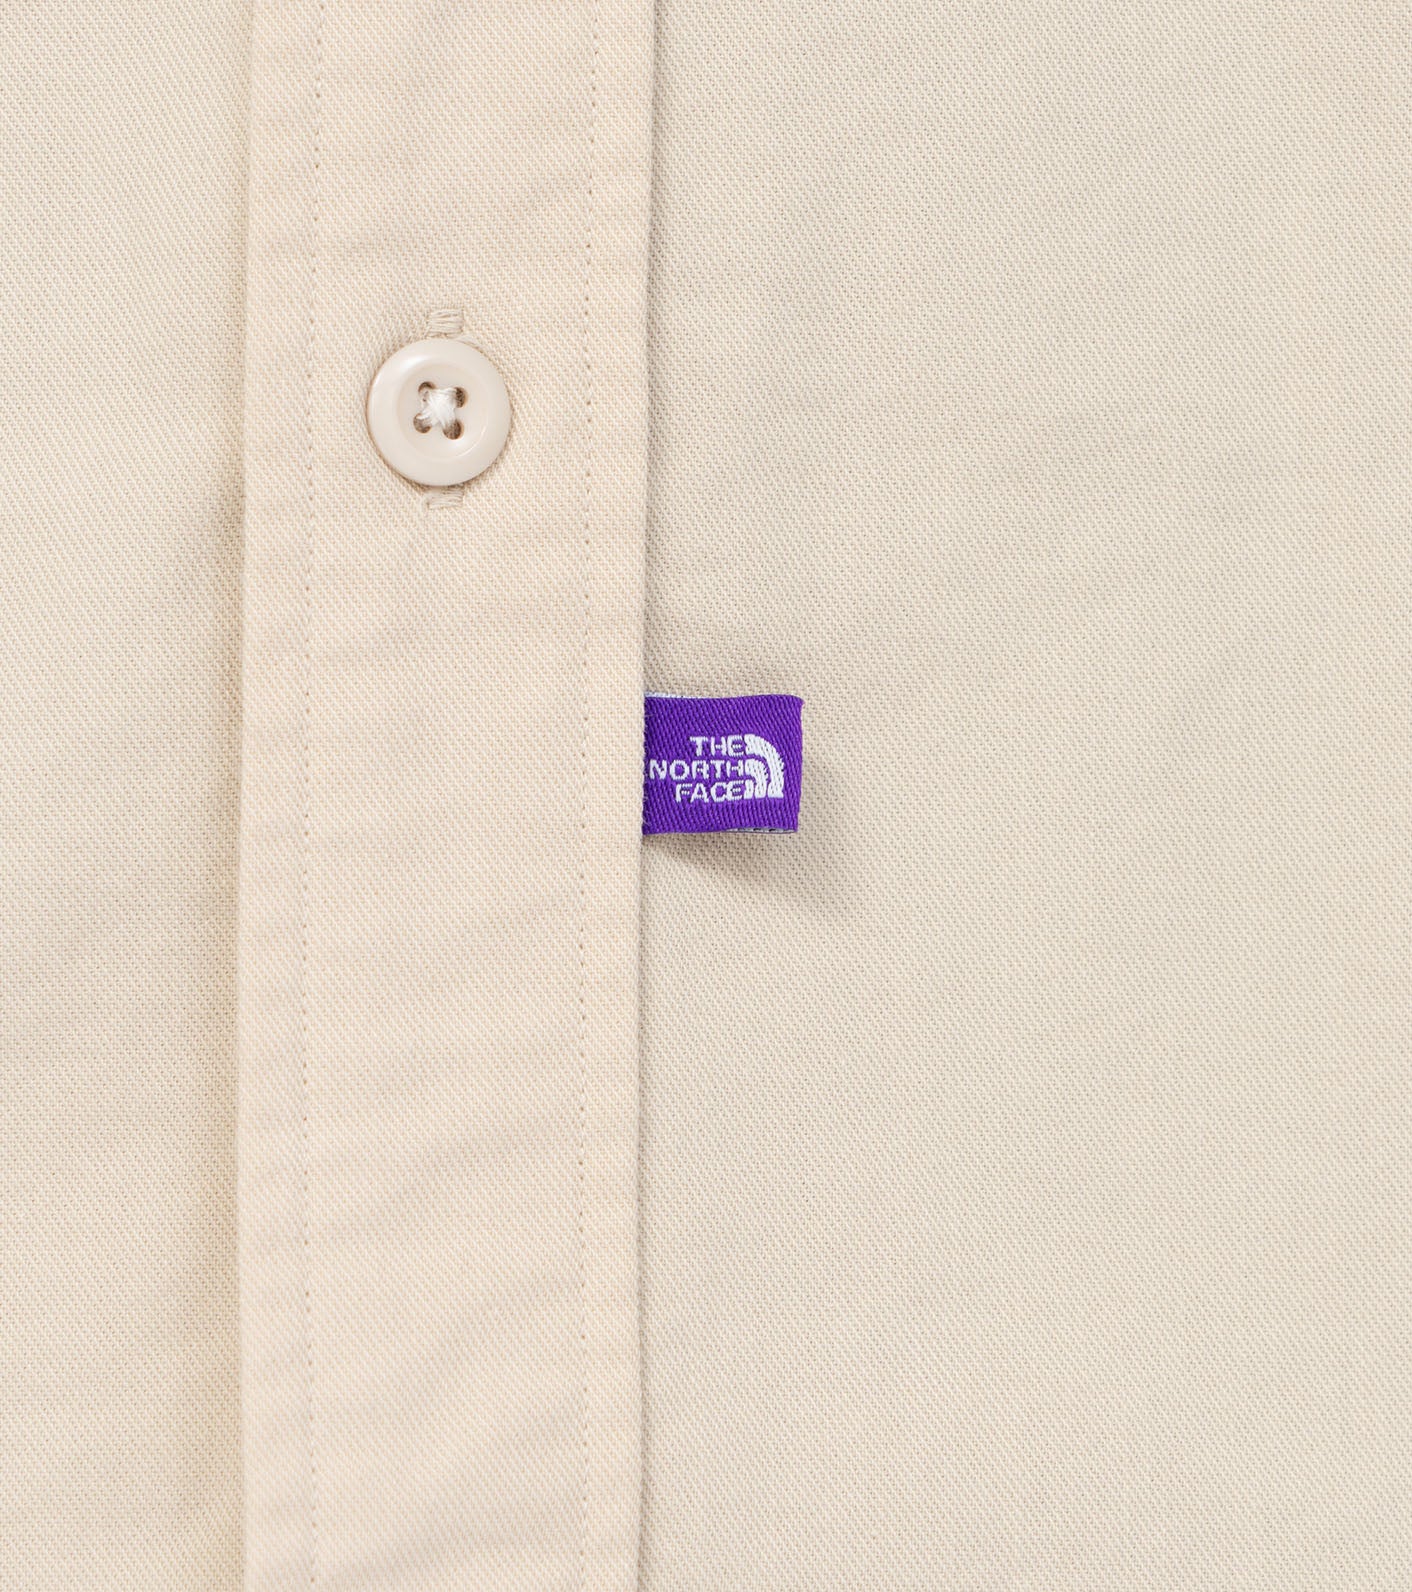 THE NORTH FACE PURPLE LABEL Double Pocket Field Work Shirt